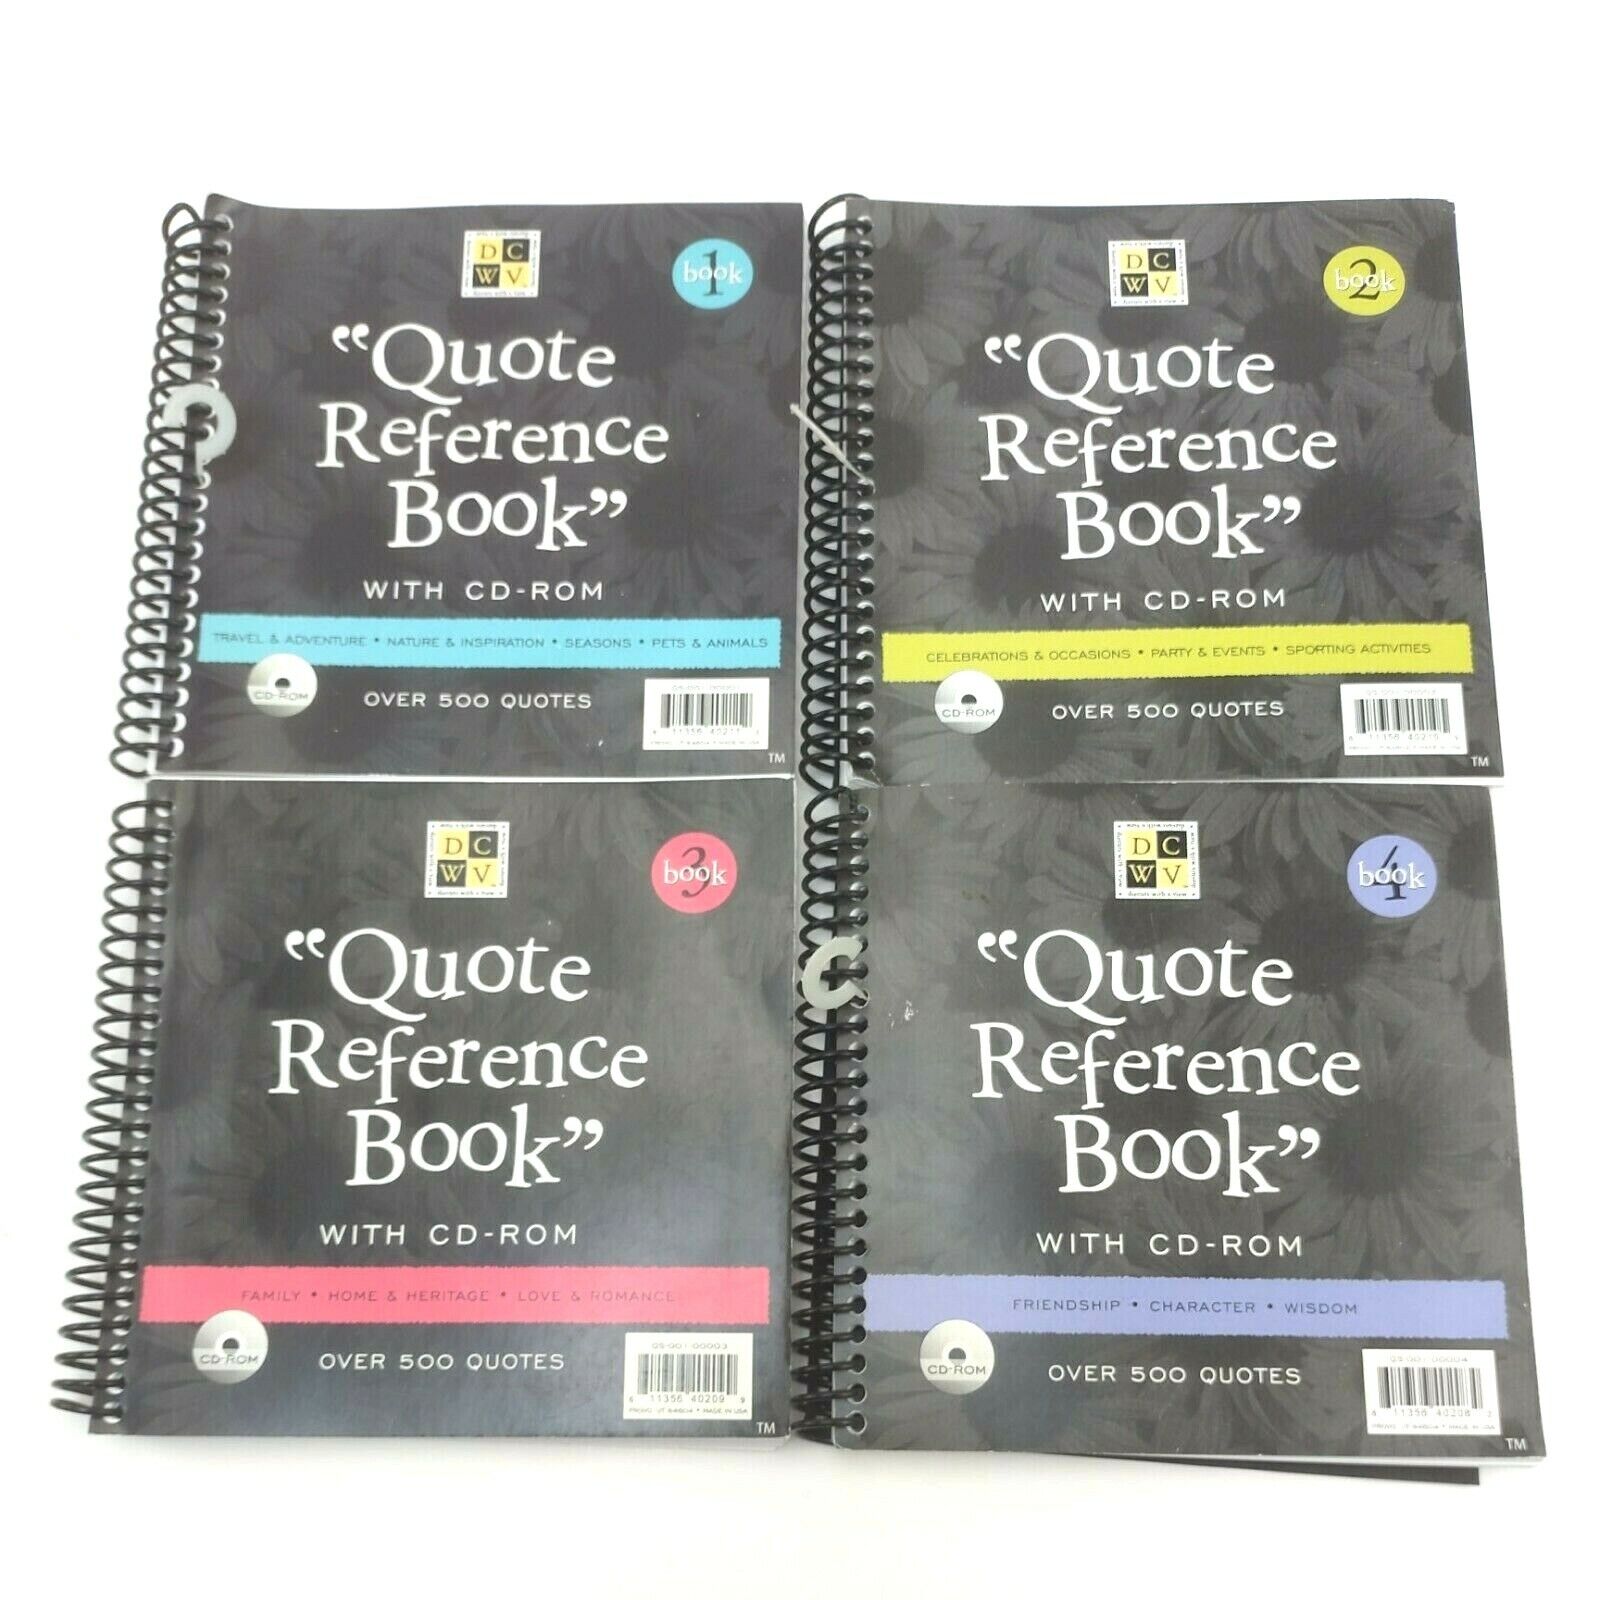 Scrapbooking "Quote Reference Book" with CD